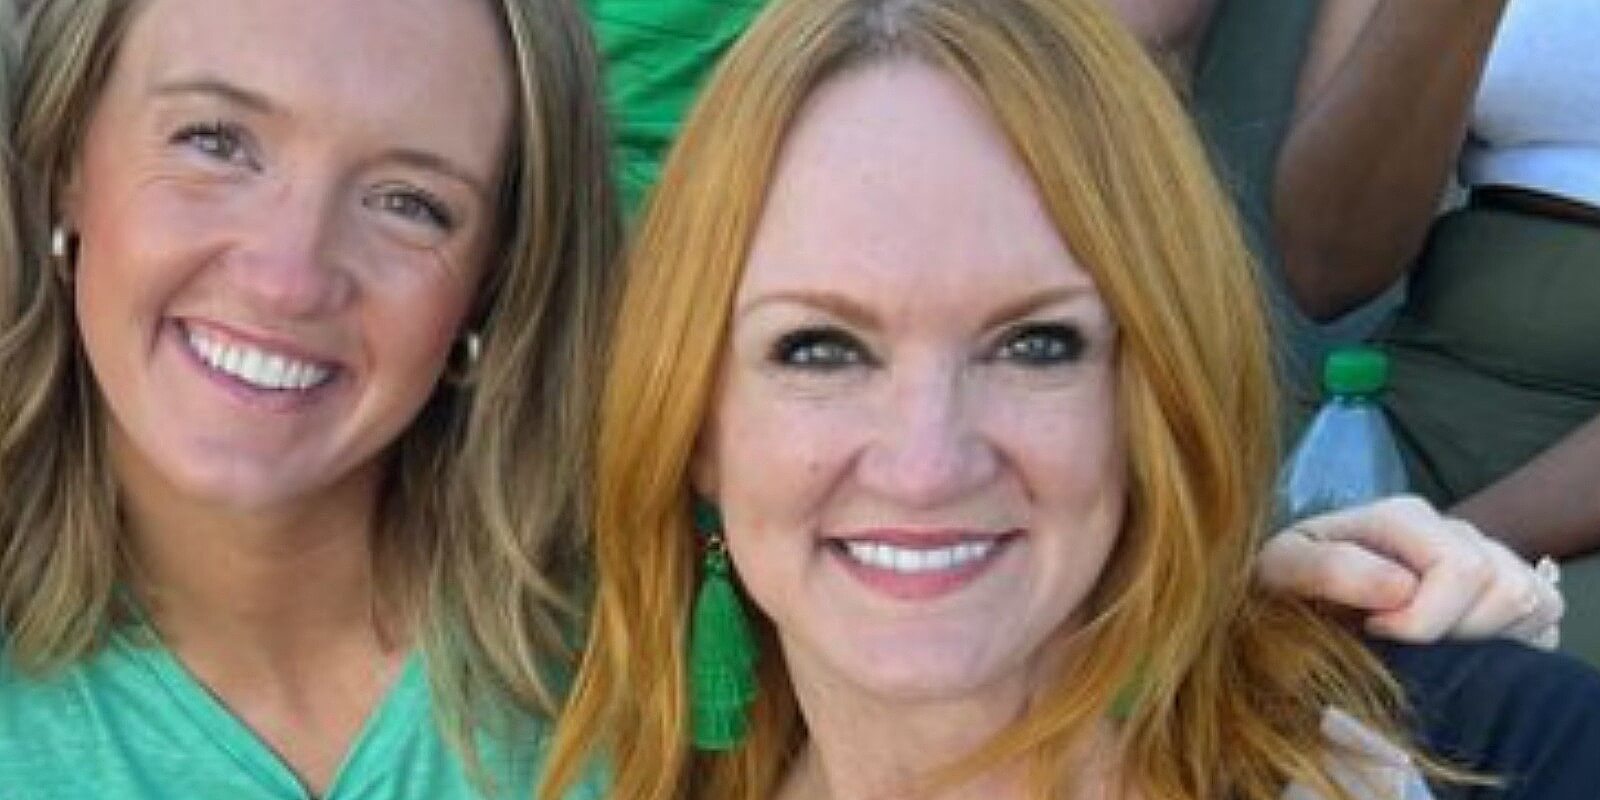 Alex and Ree Drummond pose in a photo taken at a football game.